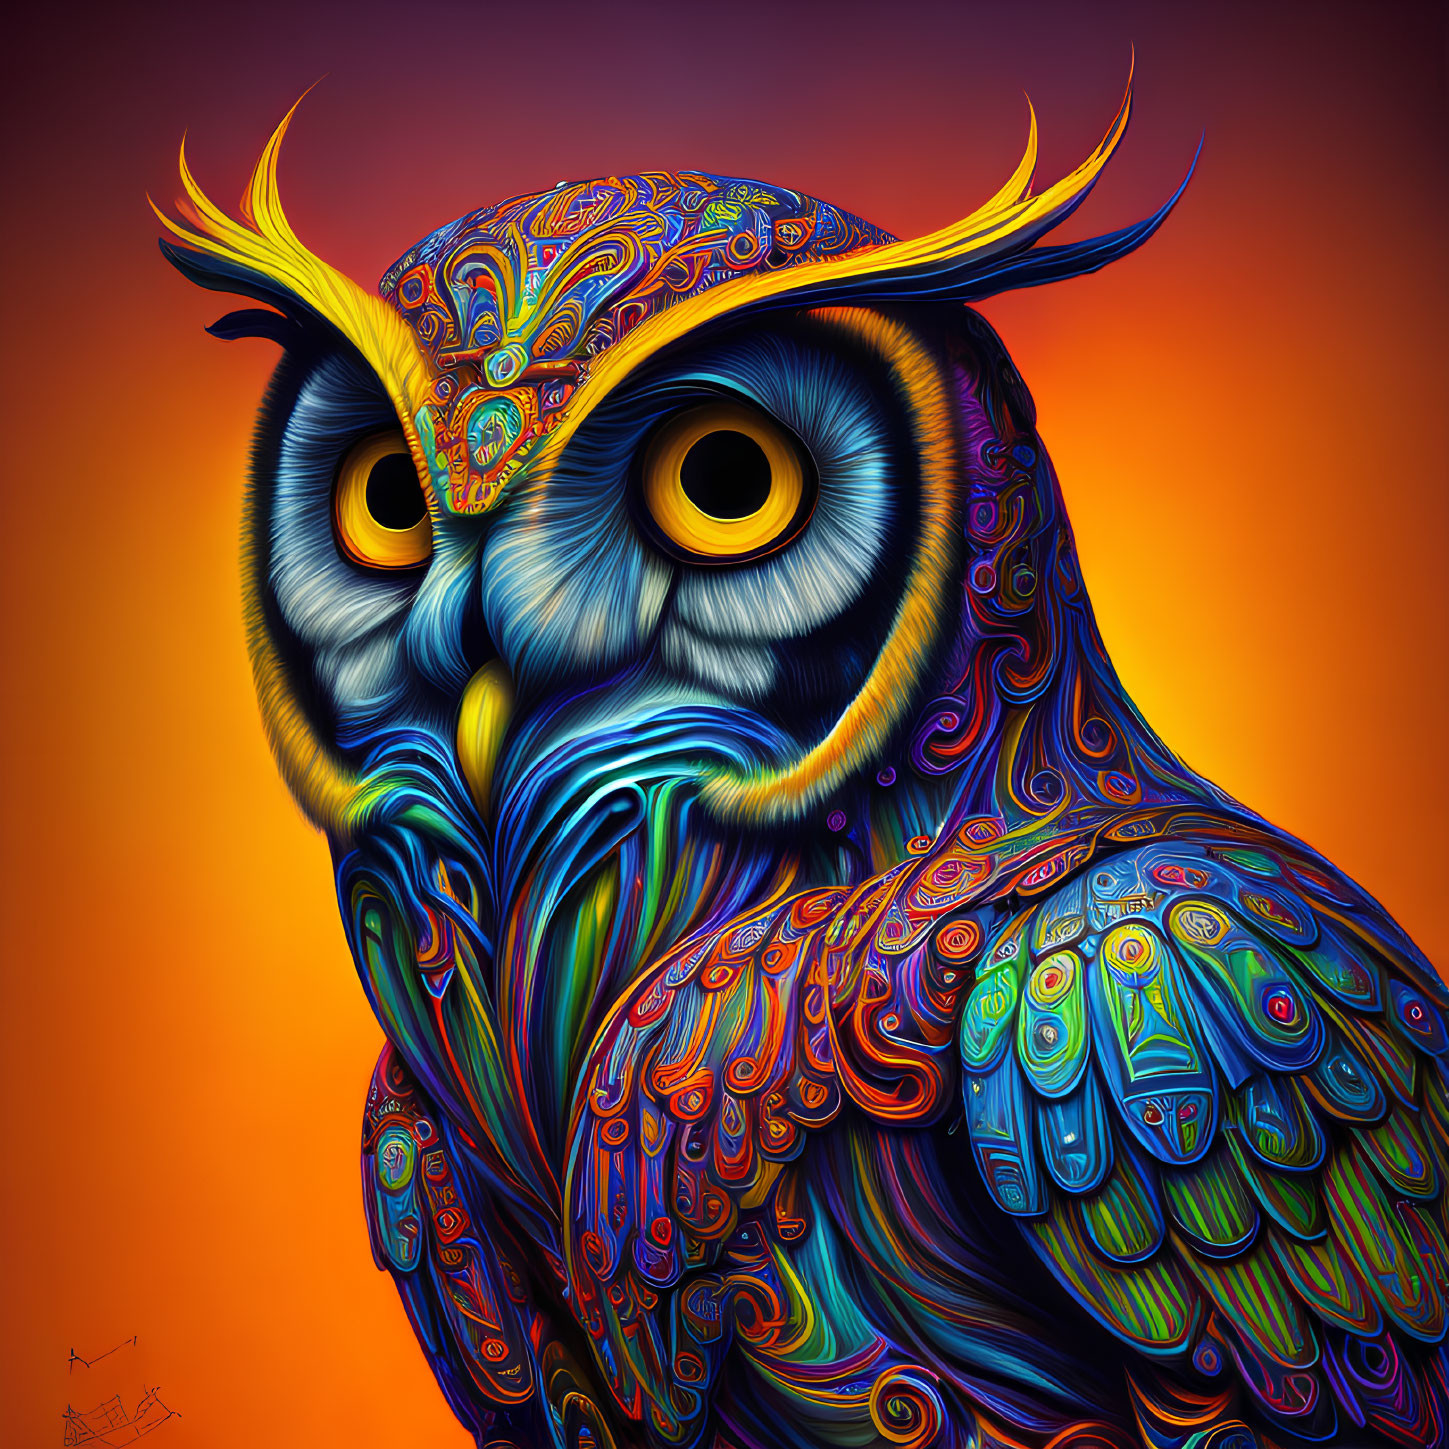 Vibrant owl illustration with intricate psychedelic patterns